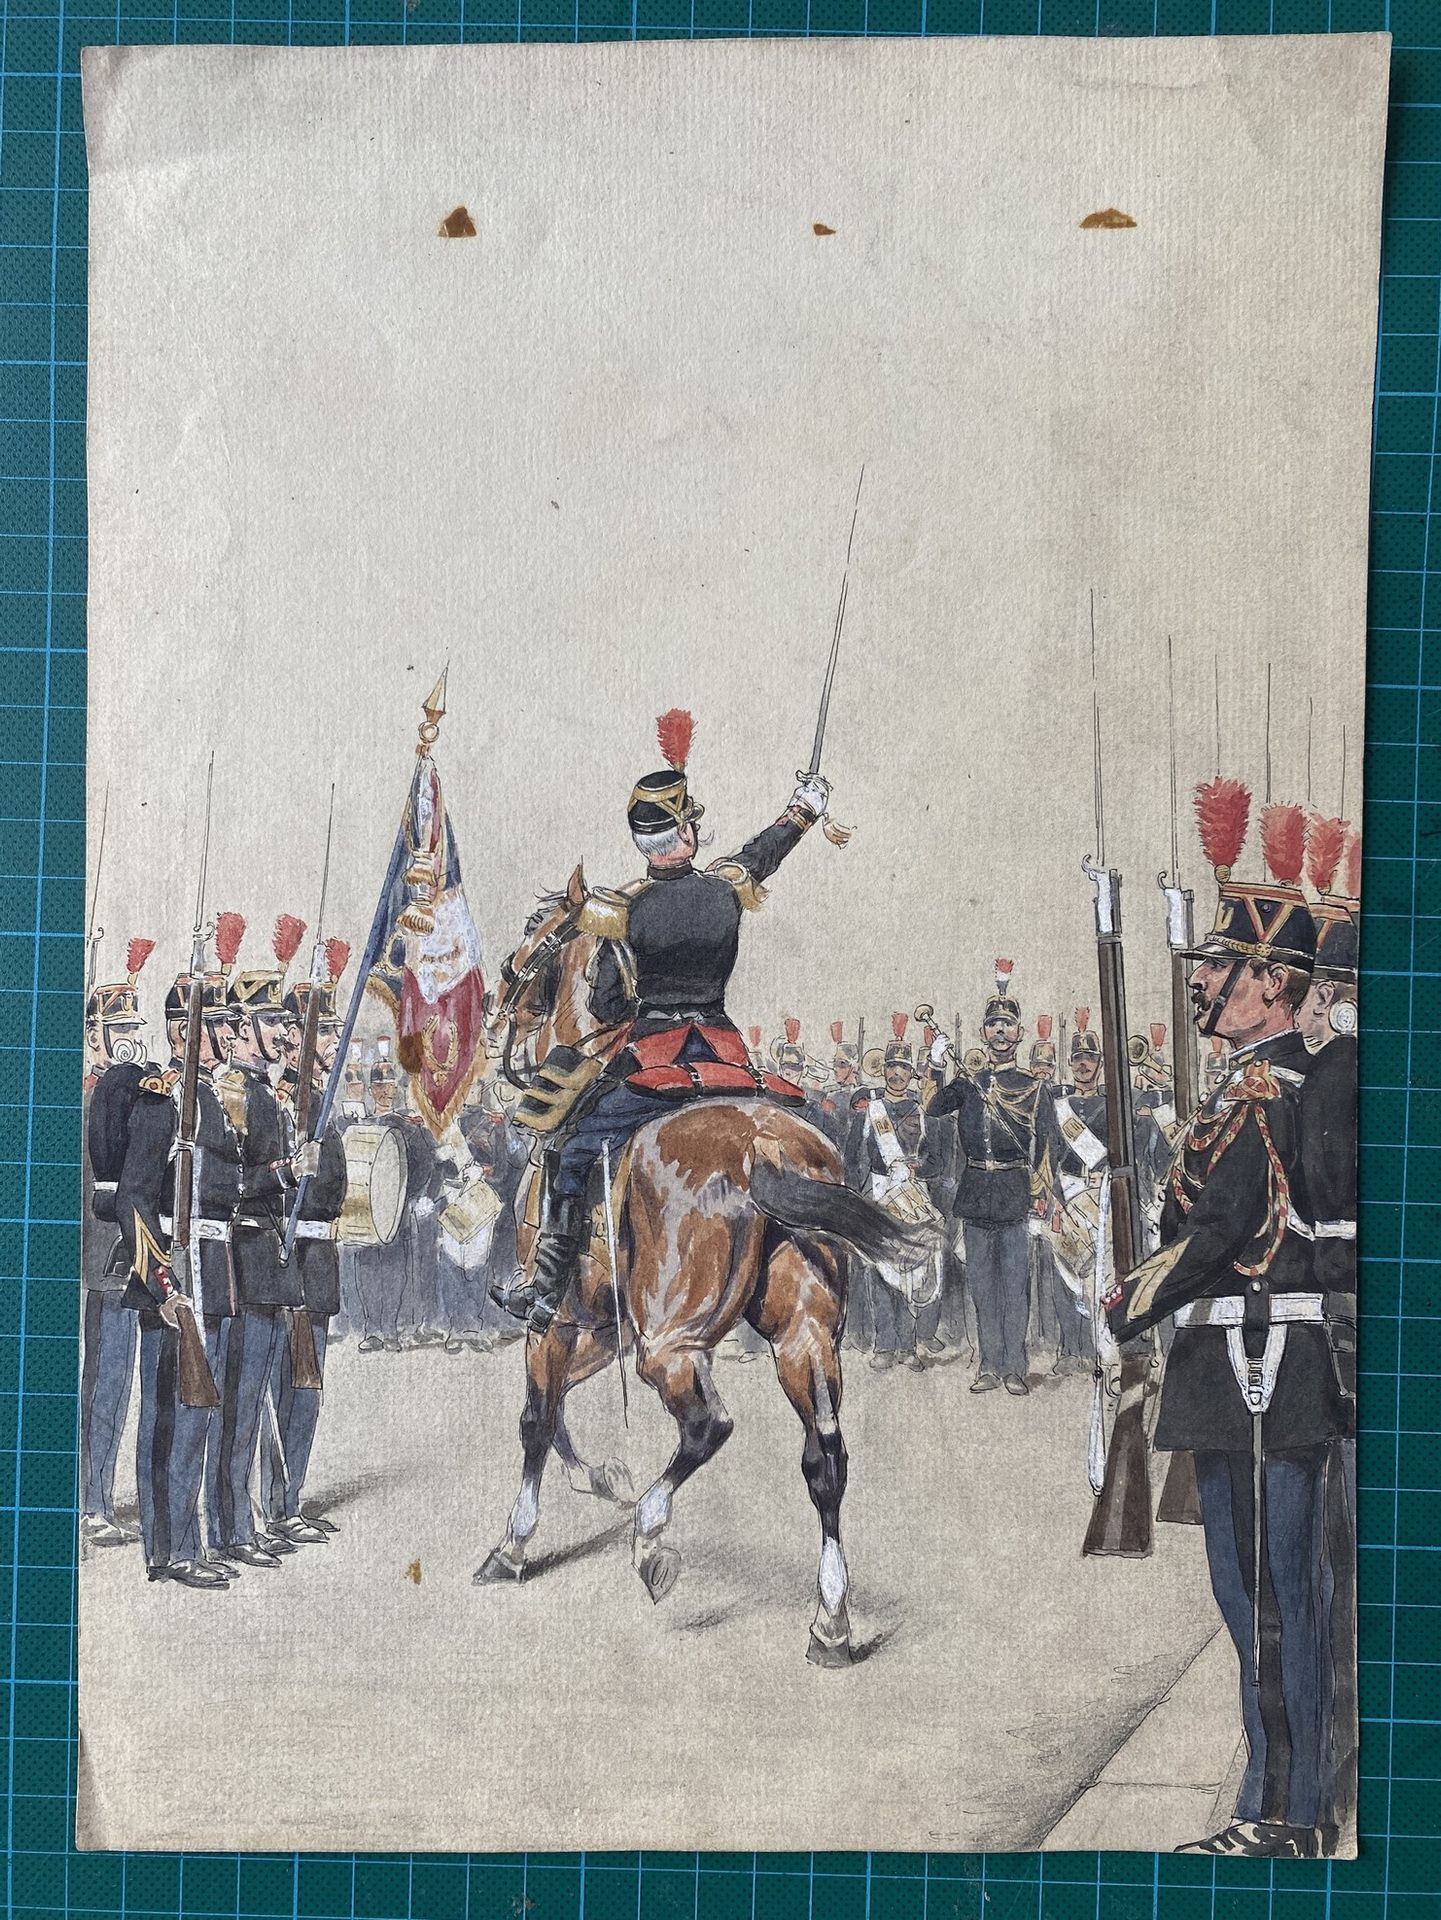 Null 
ALPHONSE LALAUZE (1872-1941), Parade of a mounted officer of the Republica&hellip;